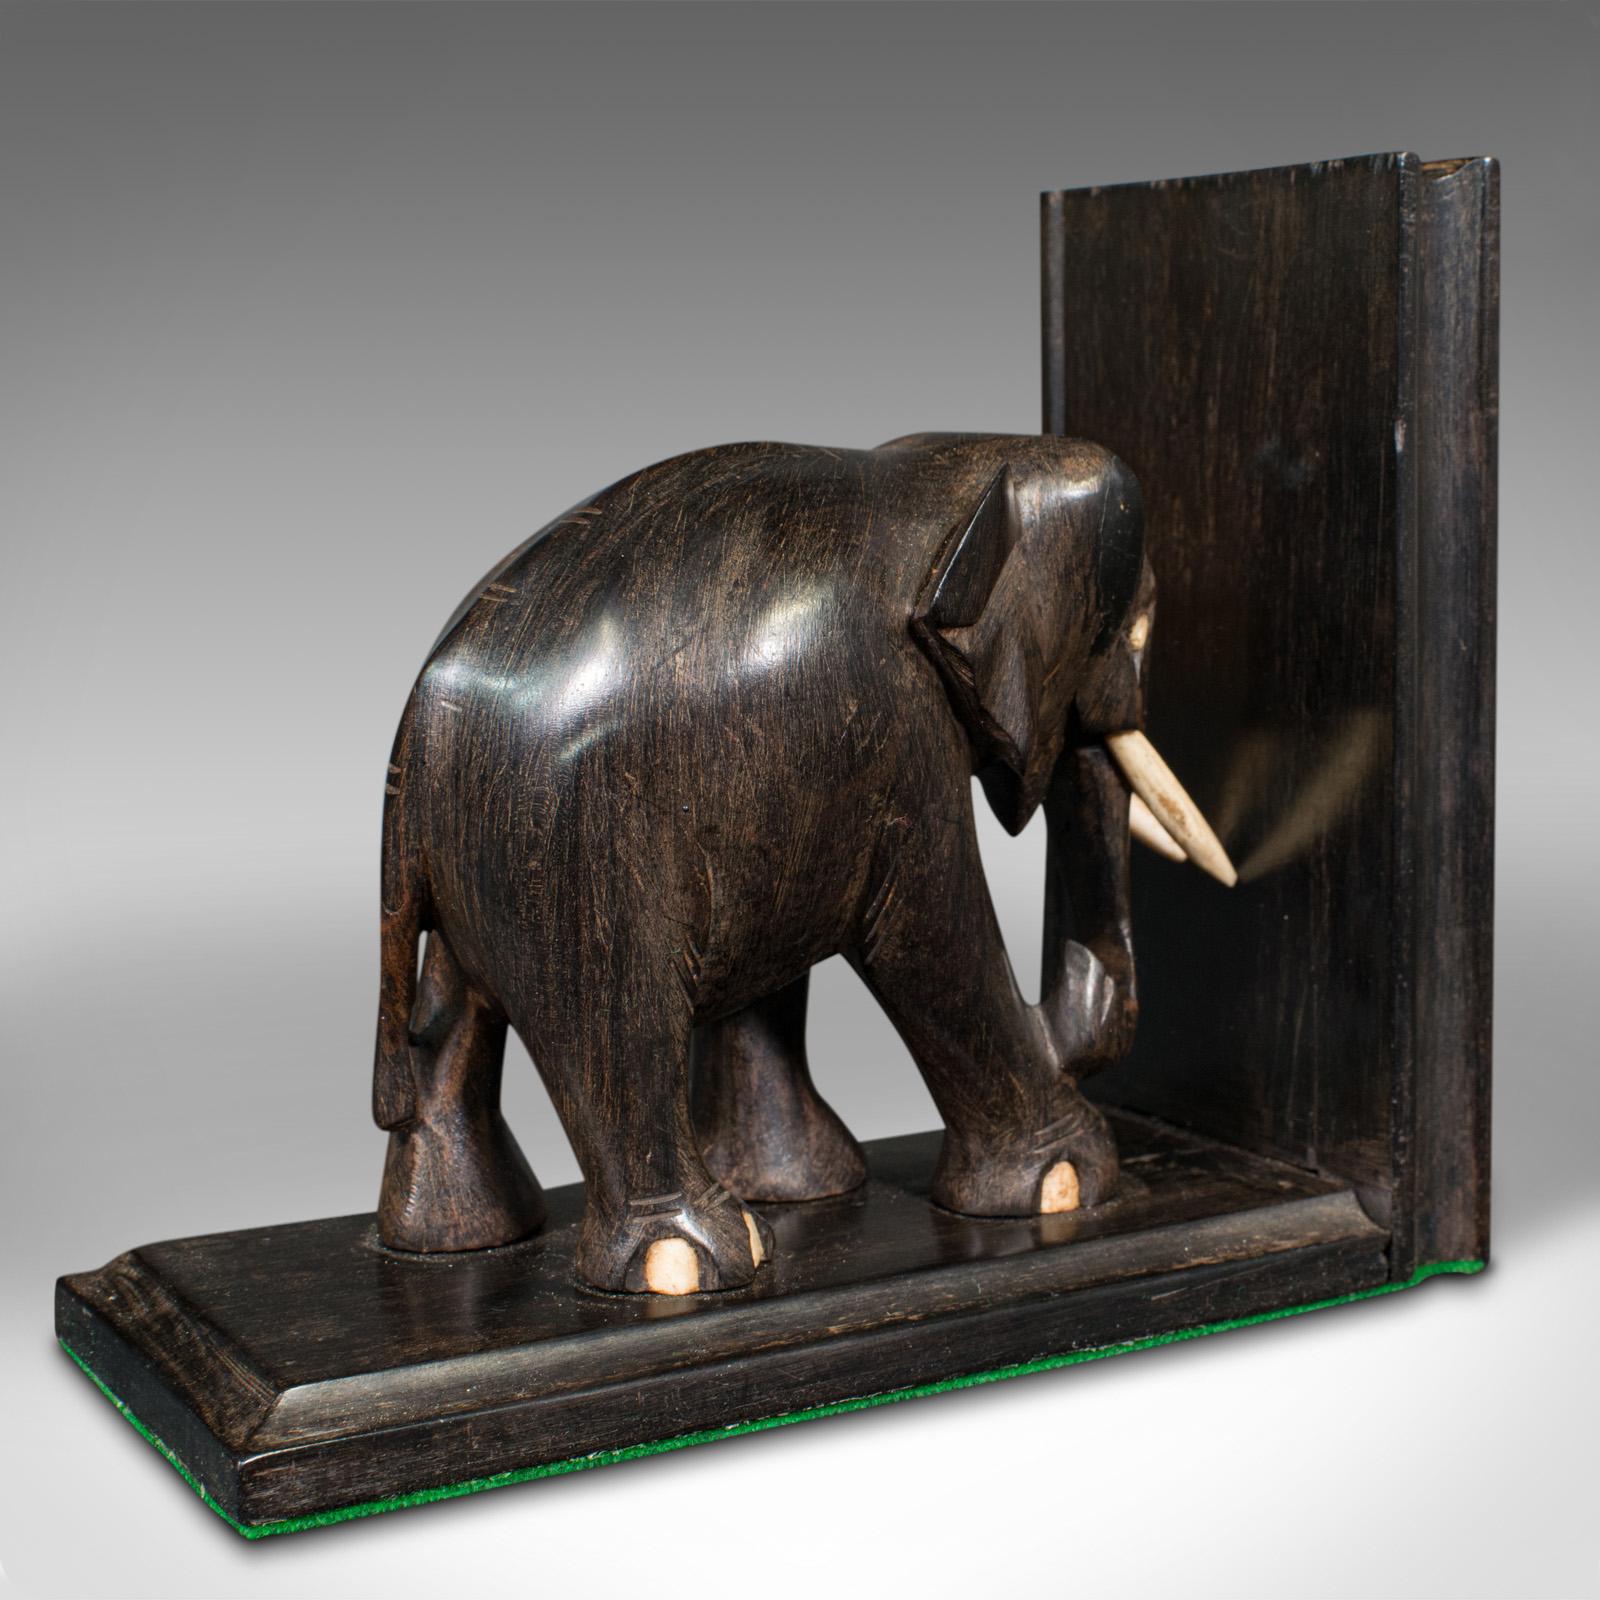 19th Century Pair of Small Antique Elephant Bookends, Anglo Indian, Ebony, Victorian, C.1890 For Sale